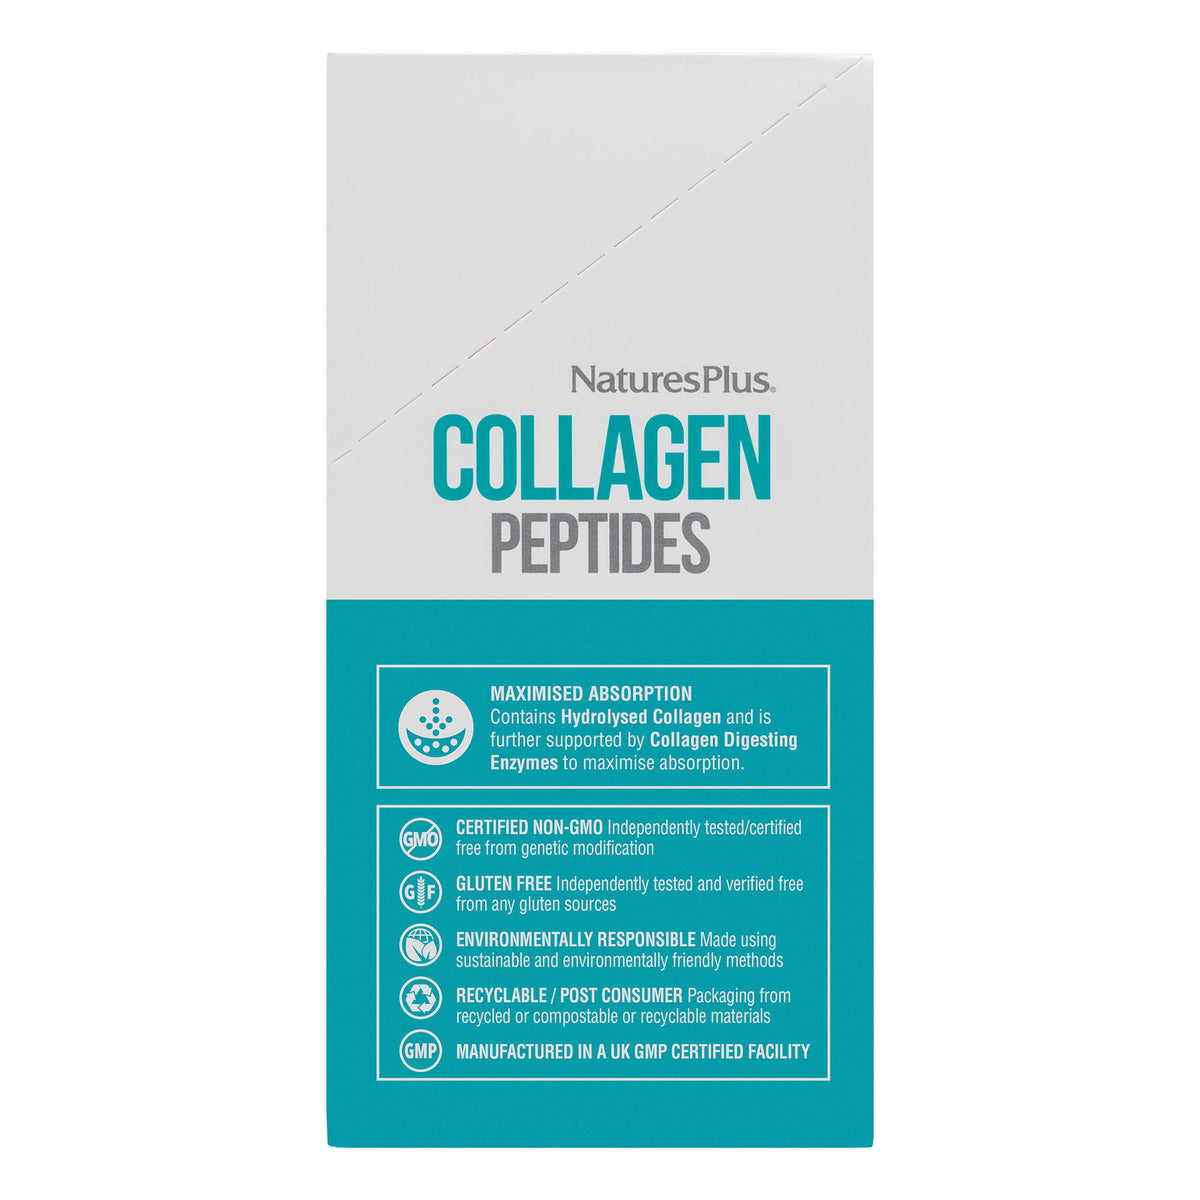 product image of Collagen Peptides containing 210 GR